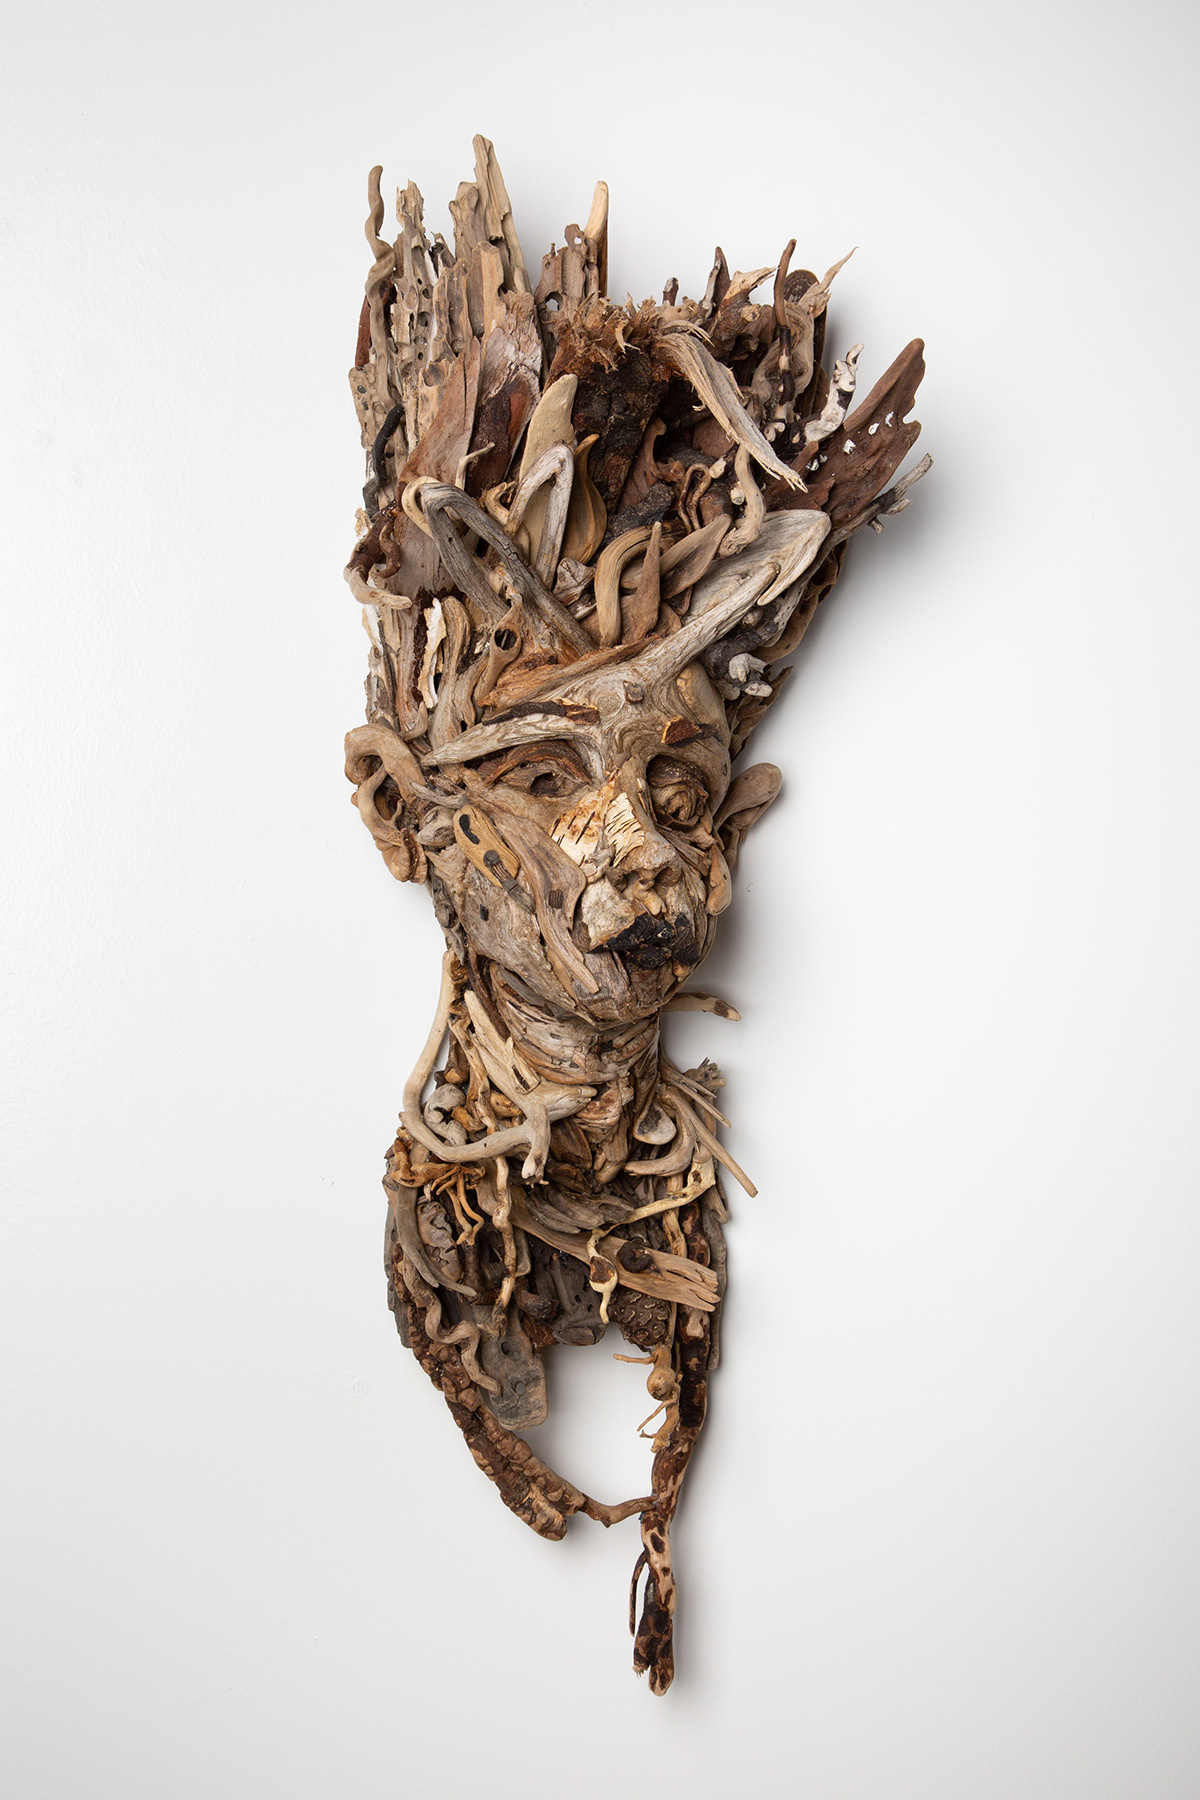 driftwood found object art Assemblage wood sculpture alto-relief